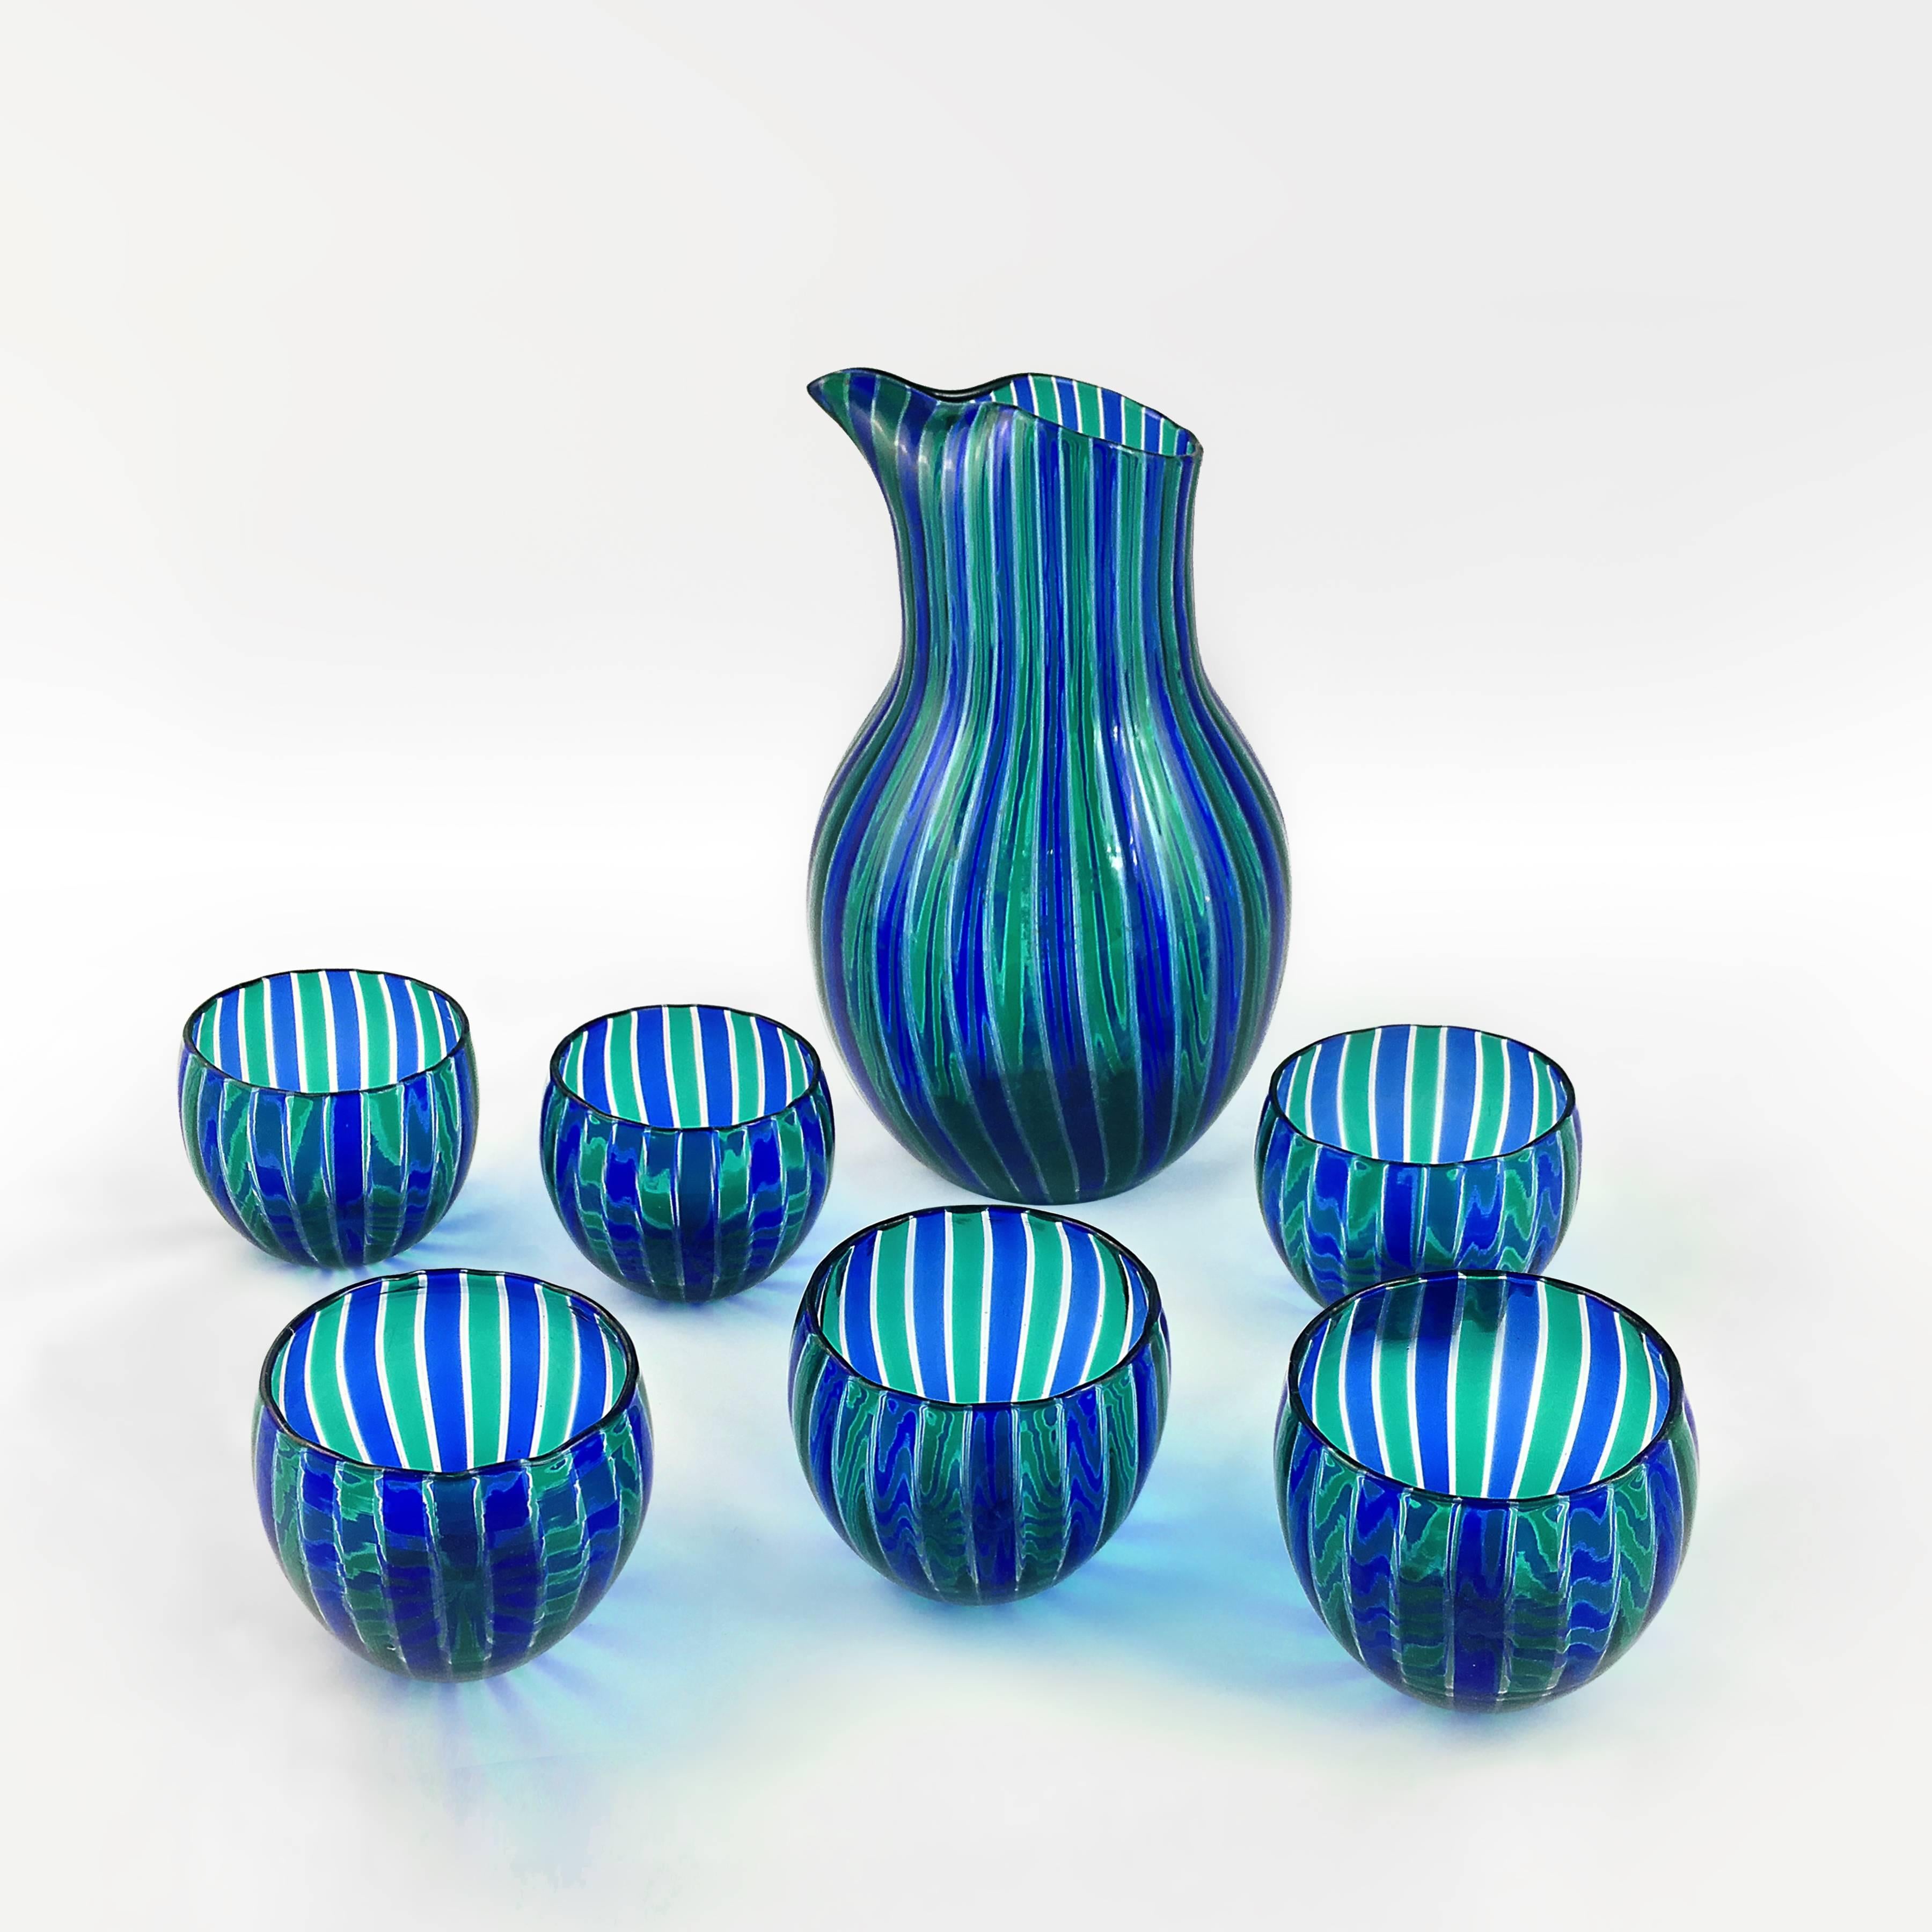 Blue-green striped set of jar and six glasses designed by Gio Ponti for Venini production.
Measures: Glasses diameter 8cm.